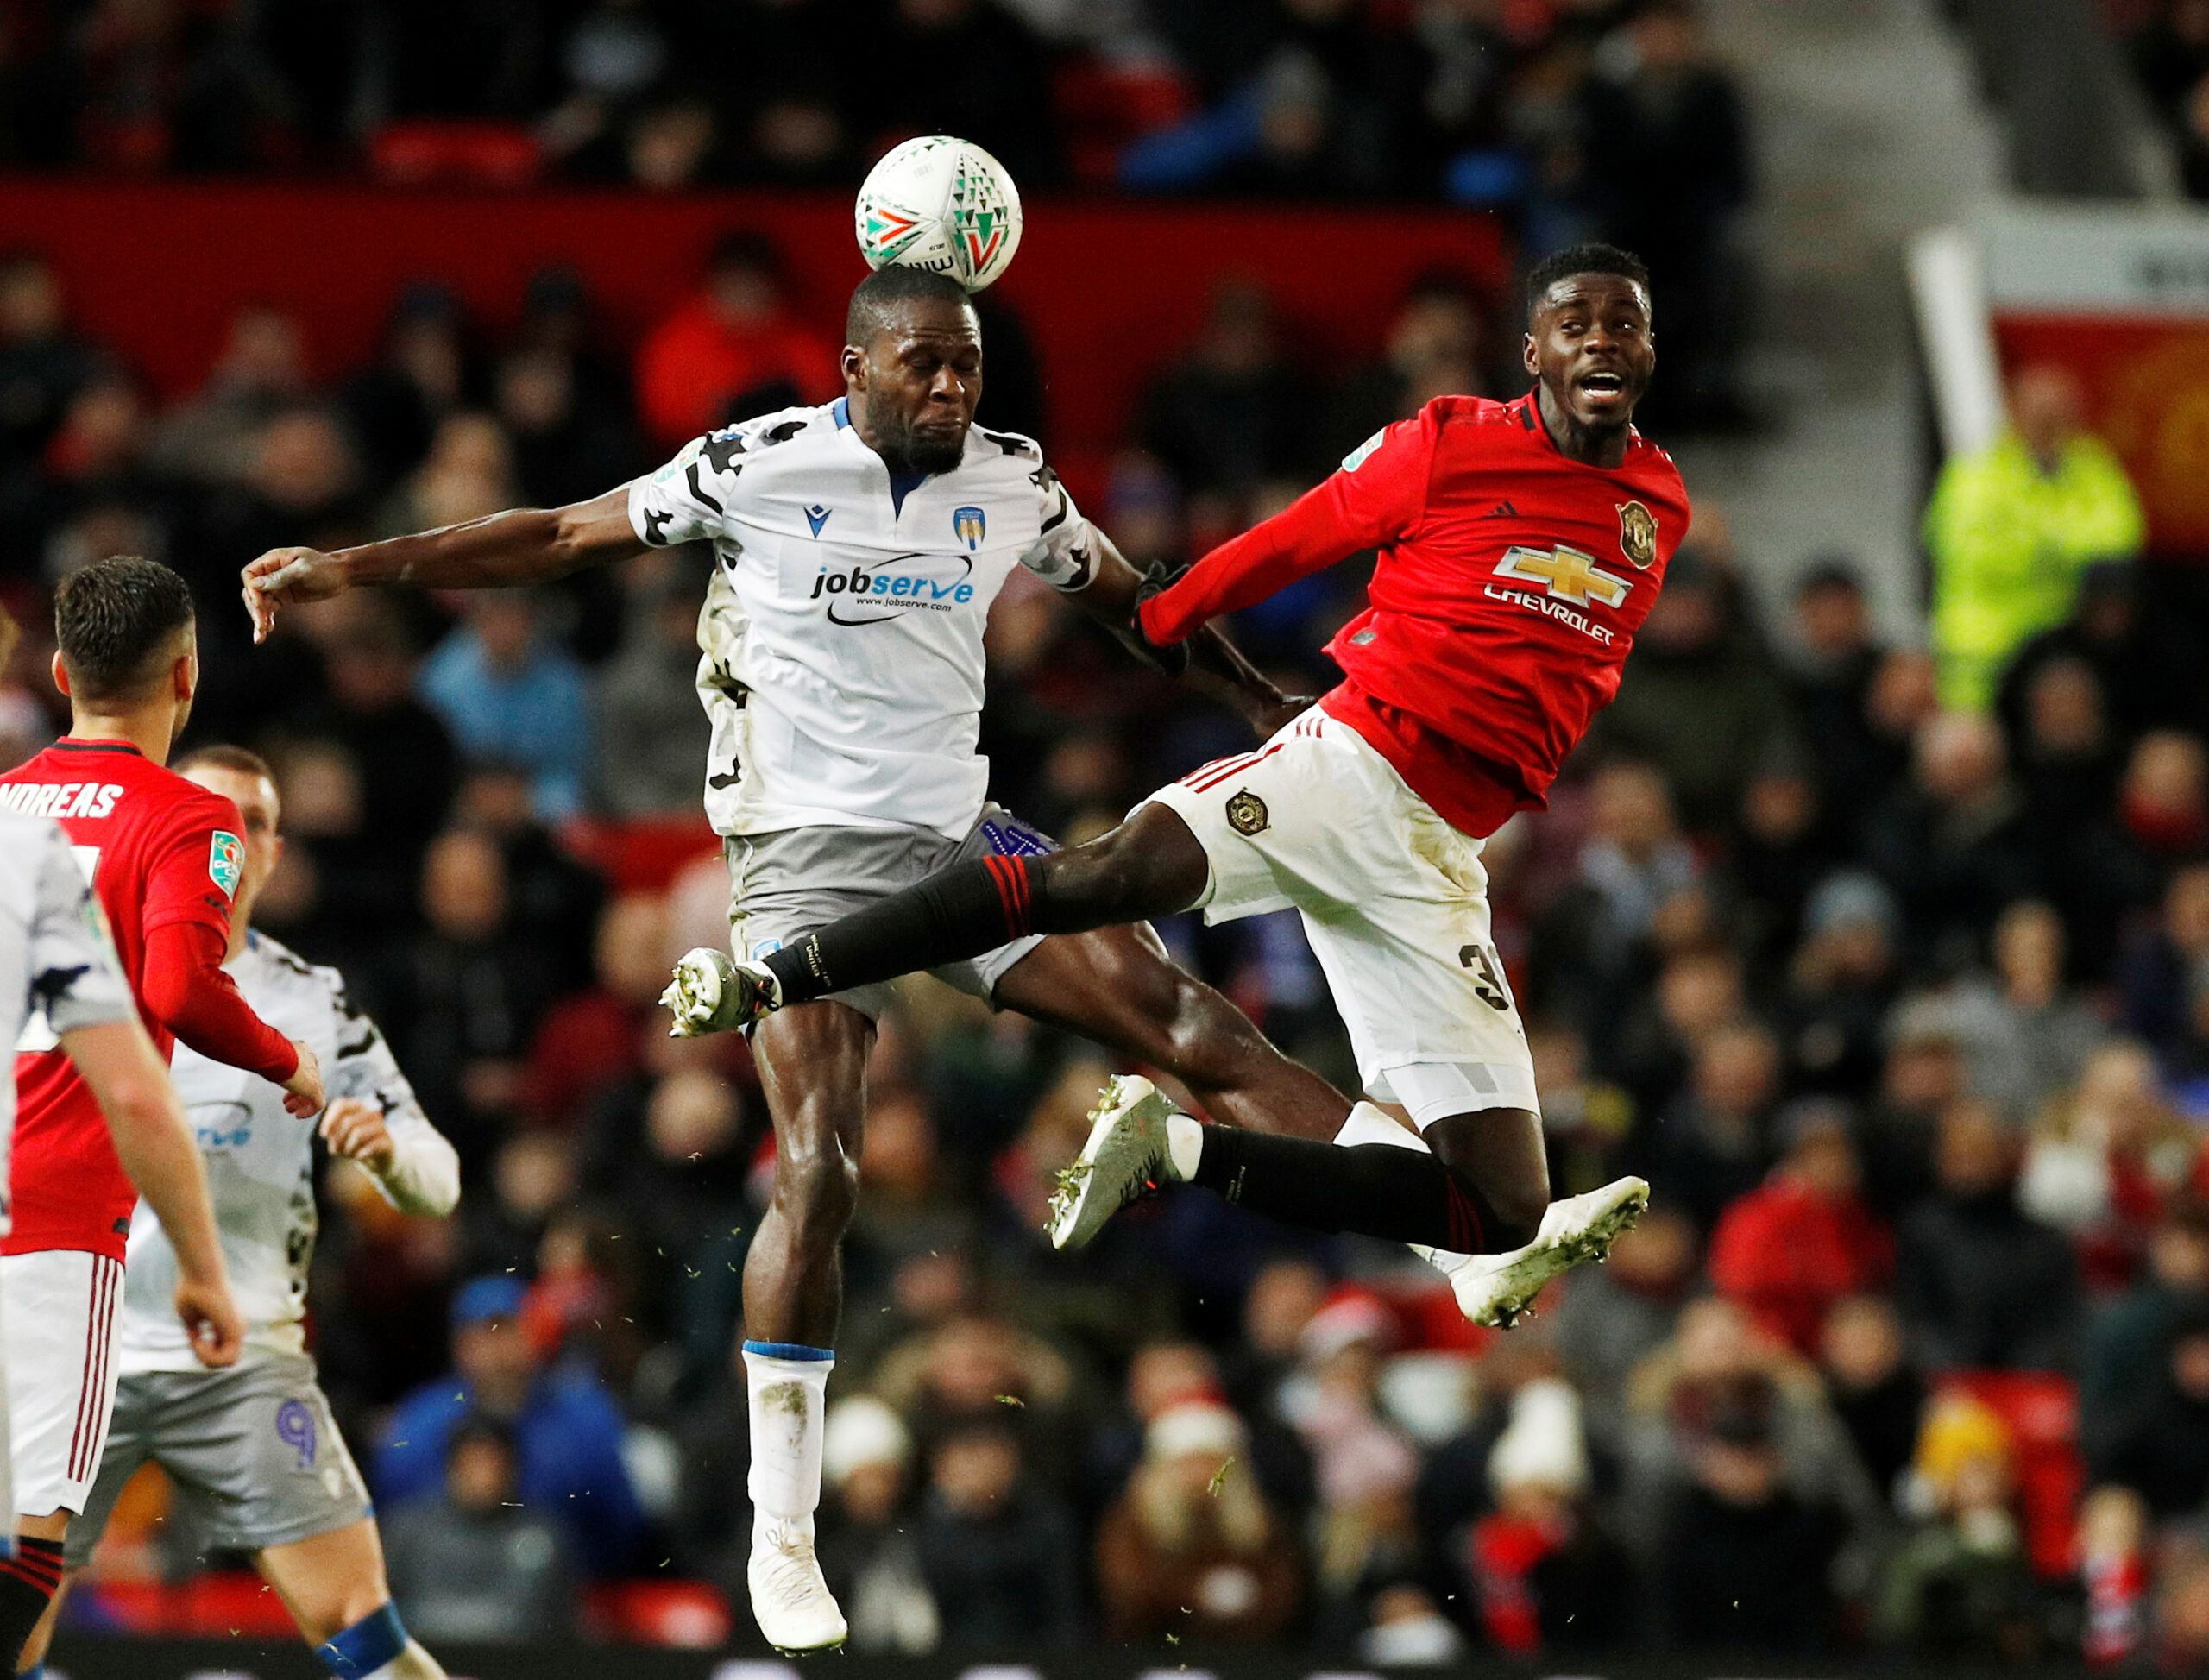 Soccer Football - Carabao Cup - Quarter Final - Manchester United v Colchester United - Old Trafford, Manchester, Britain - December 18, 2019  Colchester United's Frank Nouble in action with Manchester United's Axel Tuanzebe     REUTERS/Phil Noble  EDITORIAL USE ONLY. No use with unauthorized audio, video, data, fixture lists, club/league logos or 